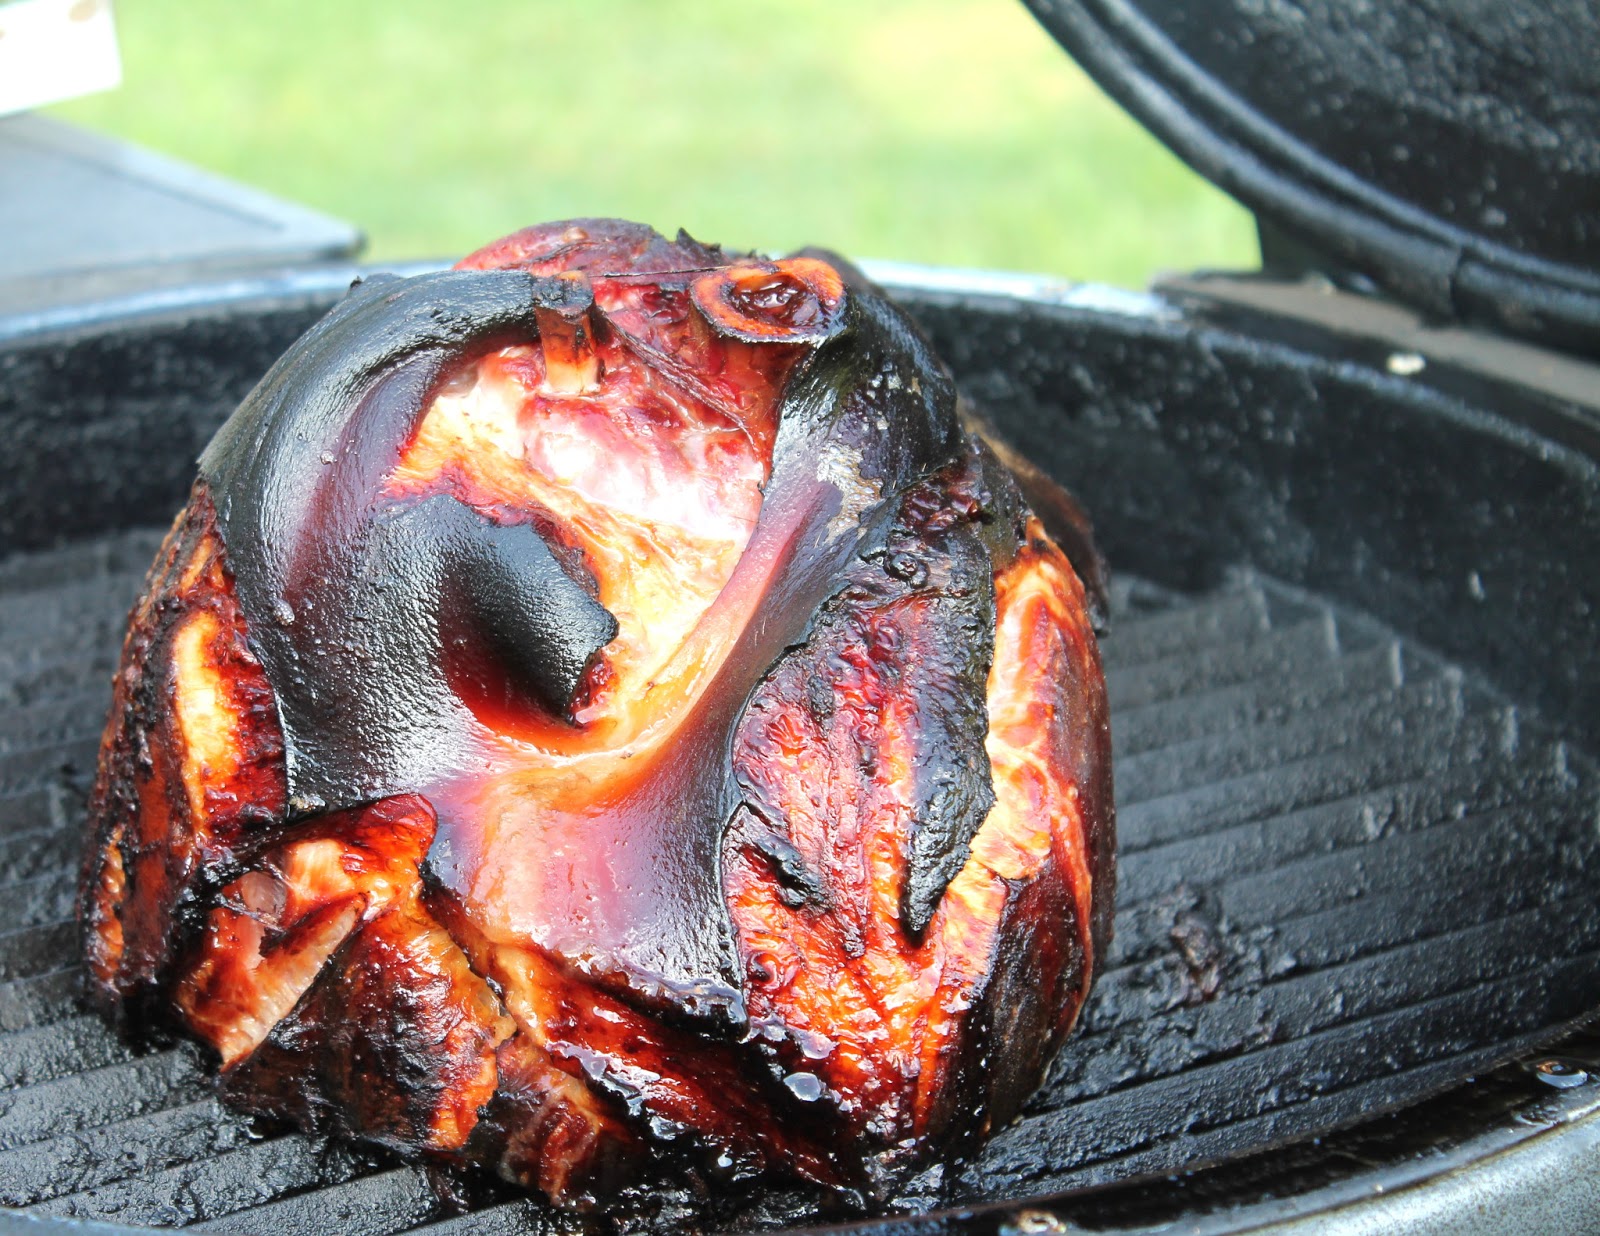 Shank Portion Ham Smoked On The Bubba Keg,Ticks On Dogs